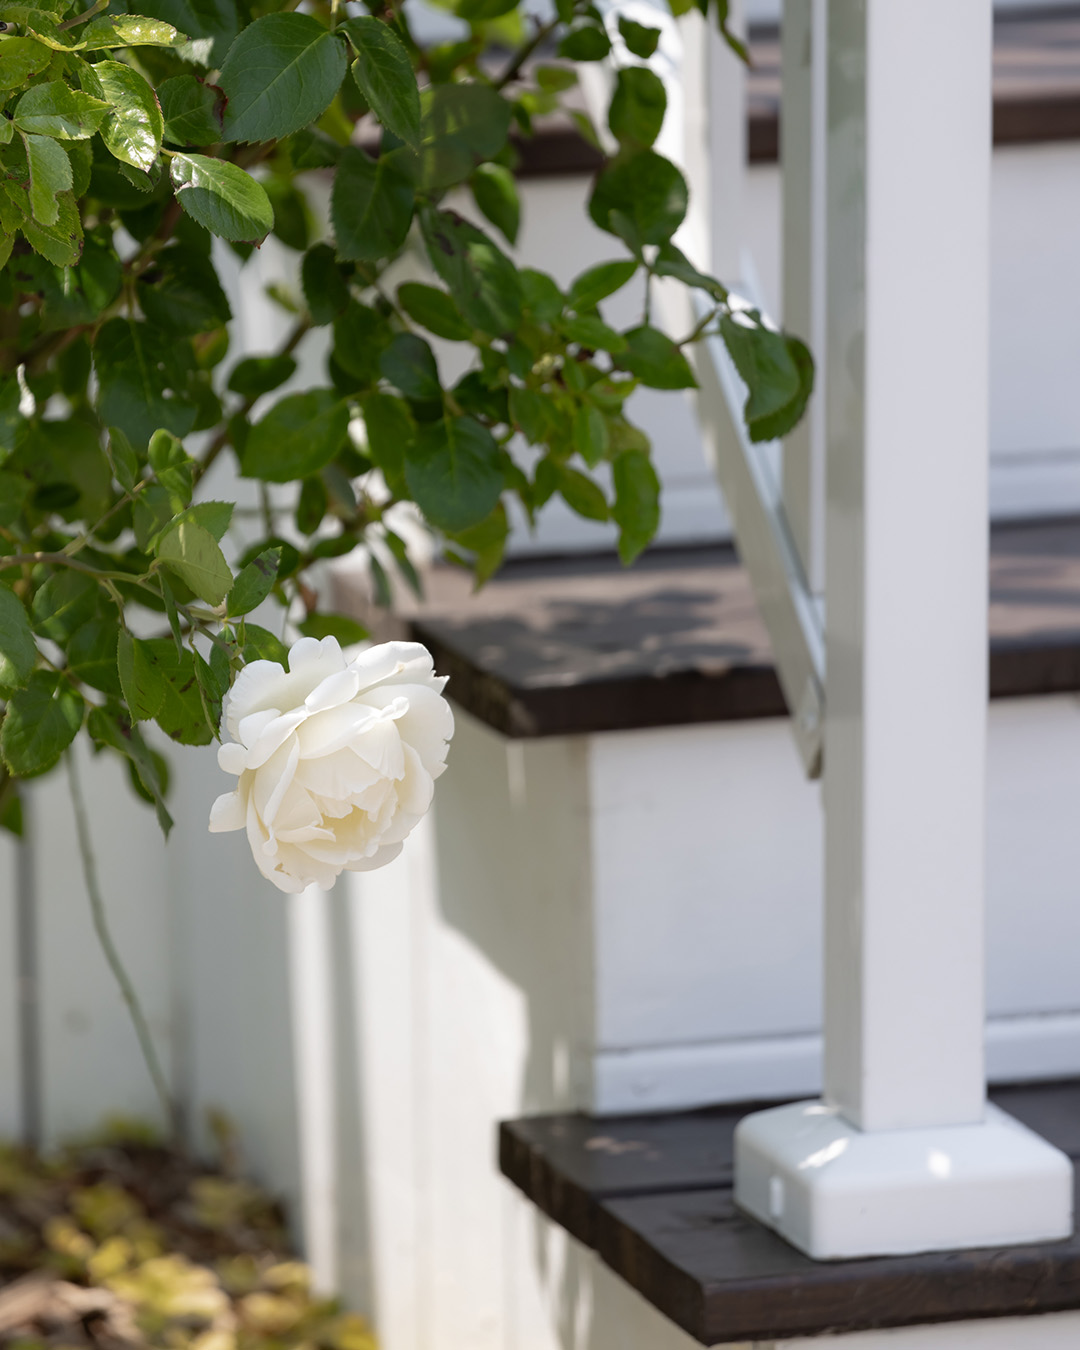 Close up of a white rose next to stairs.